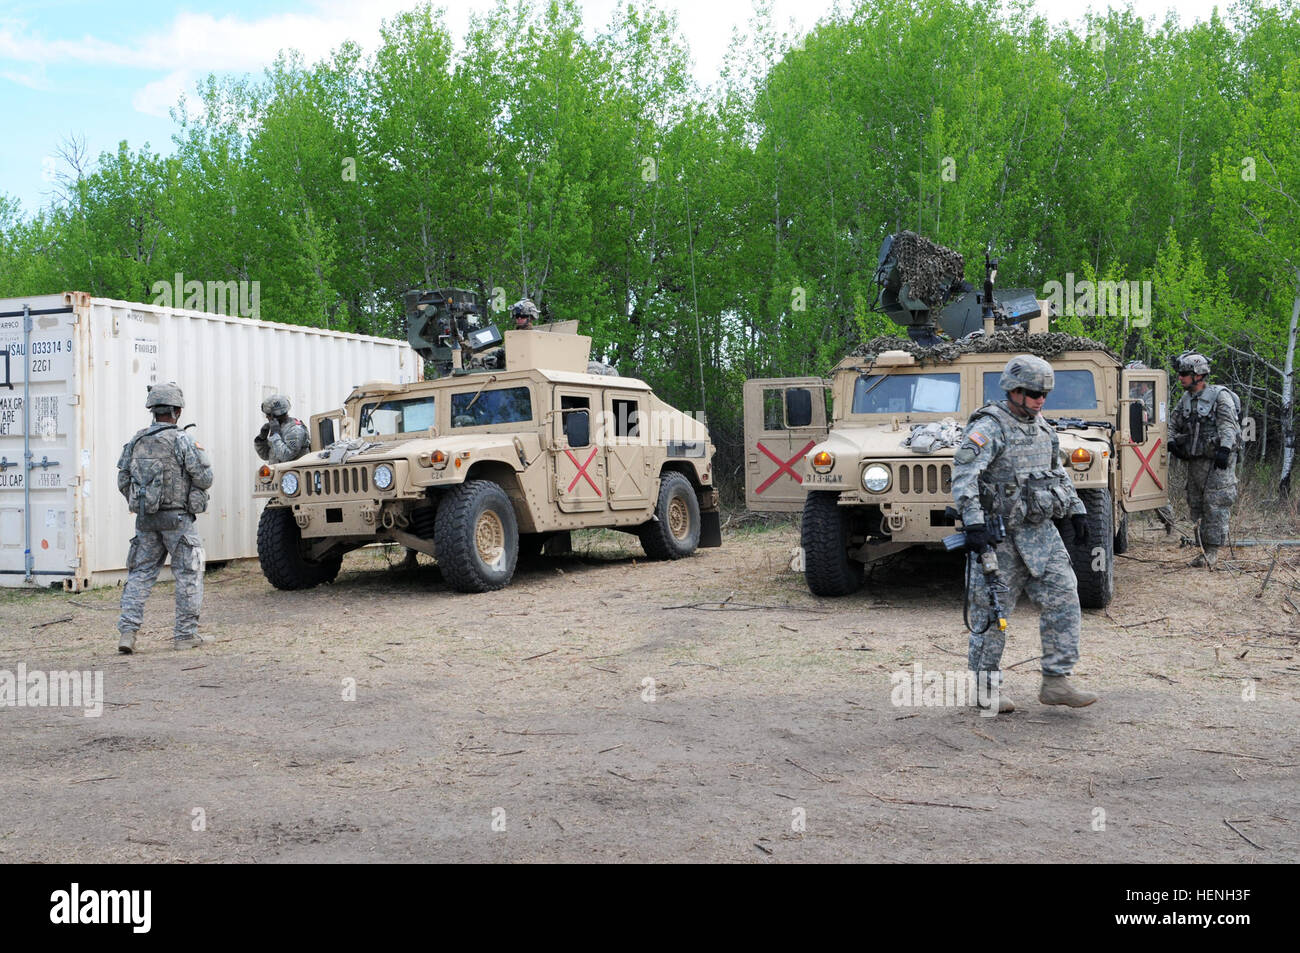 Soldiers of the 3rd Squadron, 1st Cavalry Regiment, 3rd Infantry Division out of Fort Benning, Ga., prepare to leave base camp during operations as the opposition force during Exercise Maple Resolve 2014 (EX MR14). Approximately 5,000 Canadian, British and U.S. troops participated in EX MR14, conducted here May 5-June 1. It is the culminating collective training event that validates the Canadian Army's High Readiness force for operations assigned to it by the Canadian government through the Chief of Defense Staff. 3rd ID troops augment OPFOR at Maple Resolve 14 140523-A-LG811-009 Stock Photo